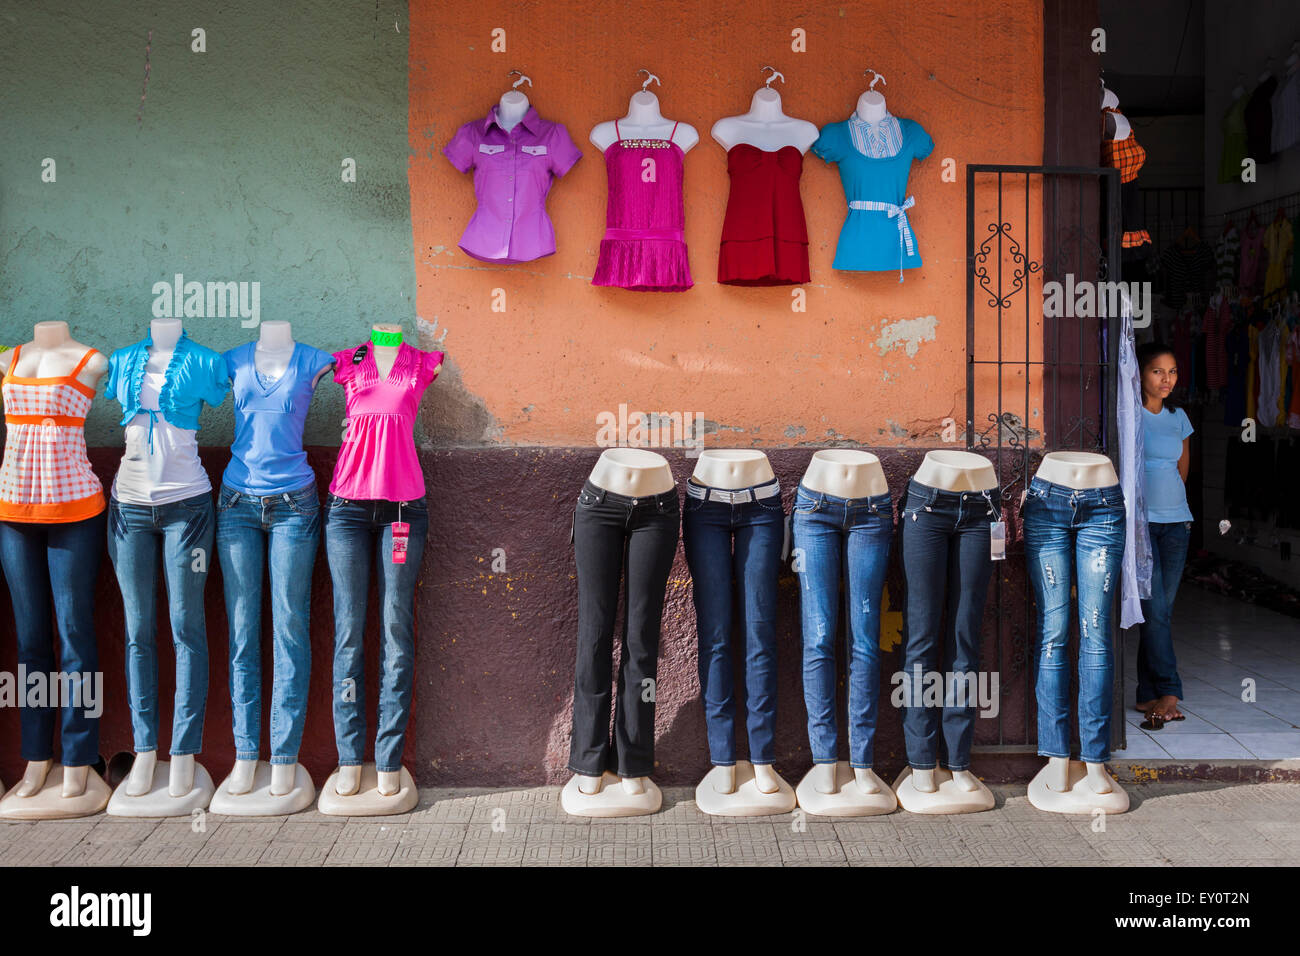 Jeans and women's clothing on mannequins and shopgirl on a store in León, Nicaragua Stock Photo